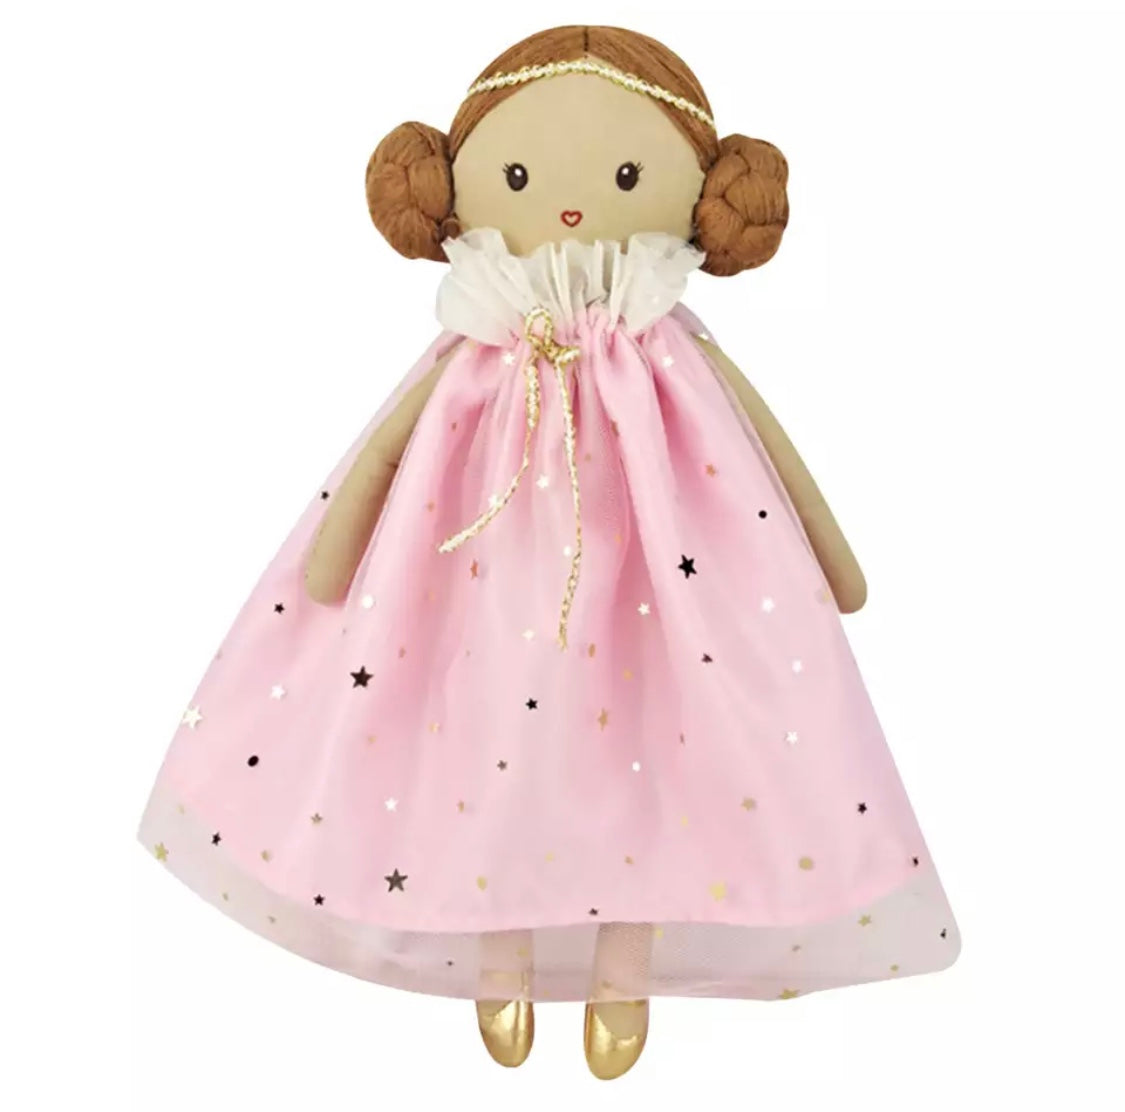 Ballerina Doll with star tulle dress